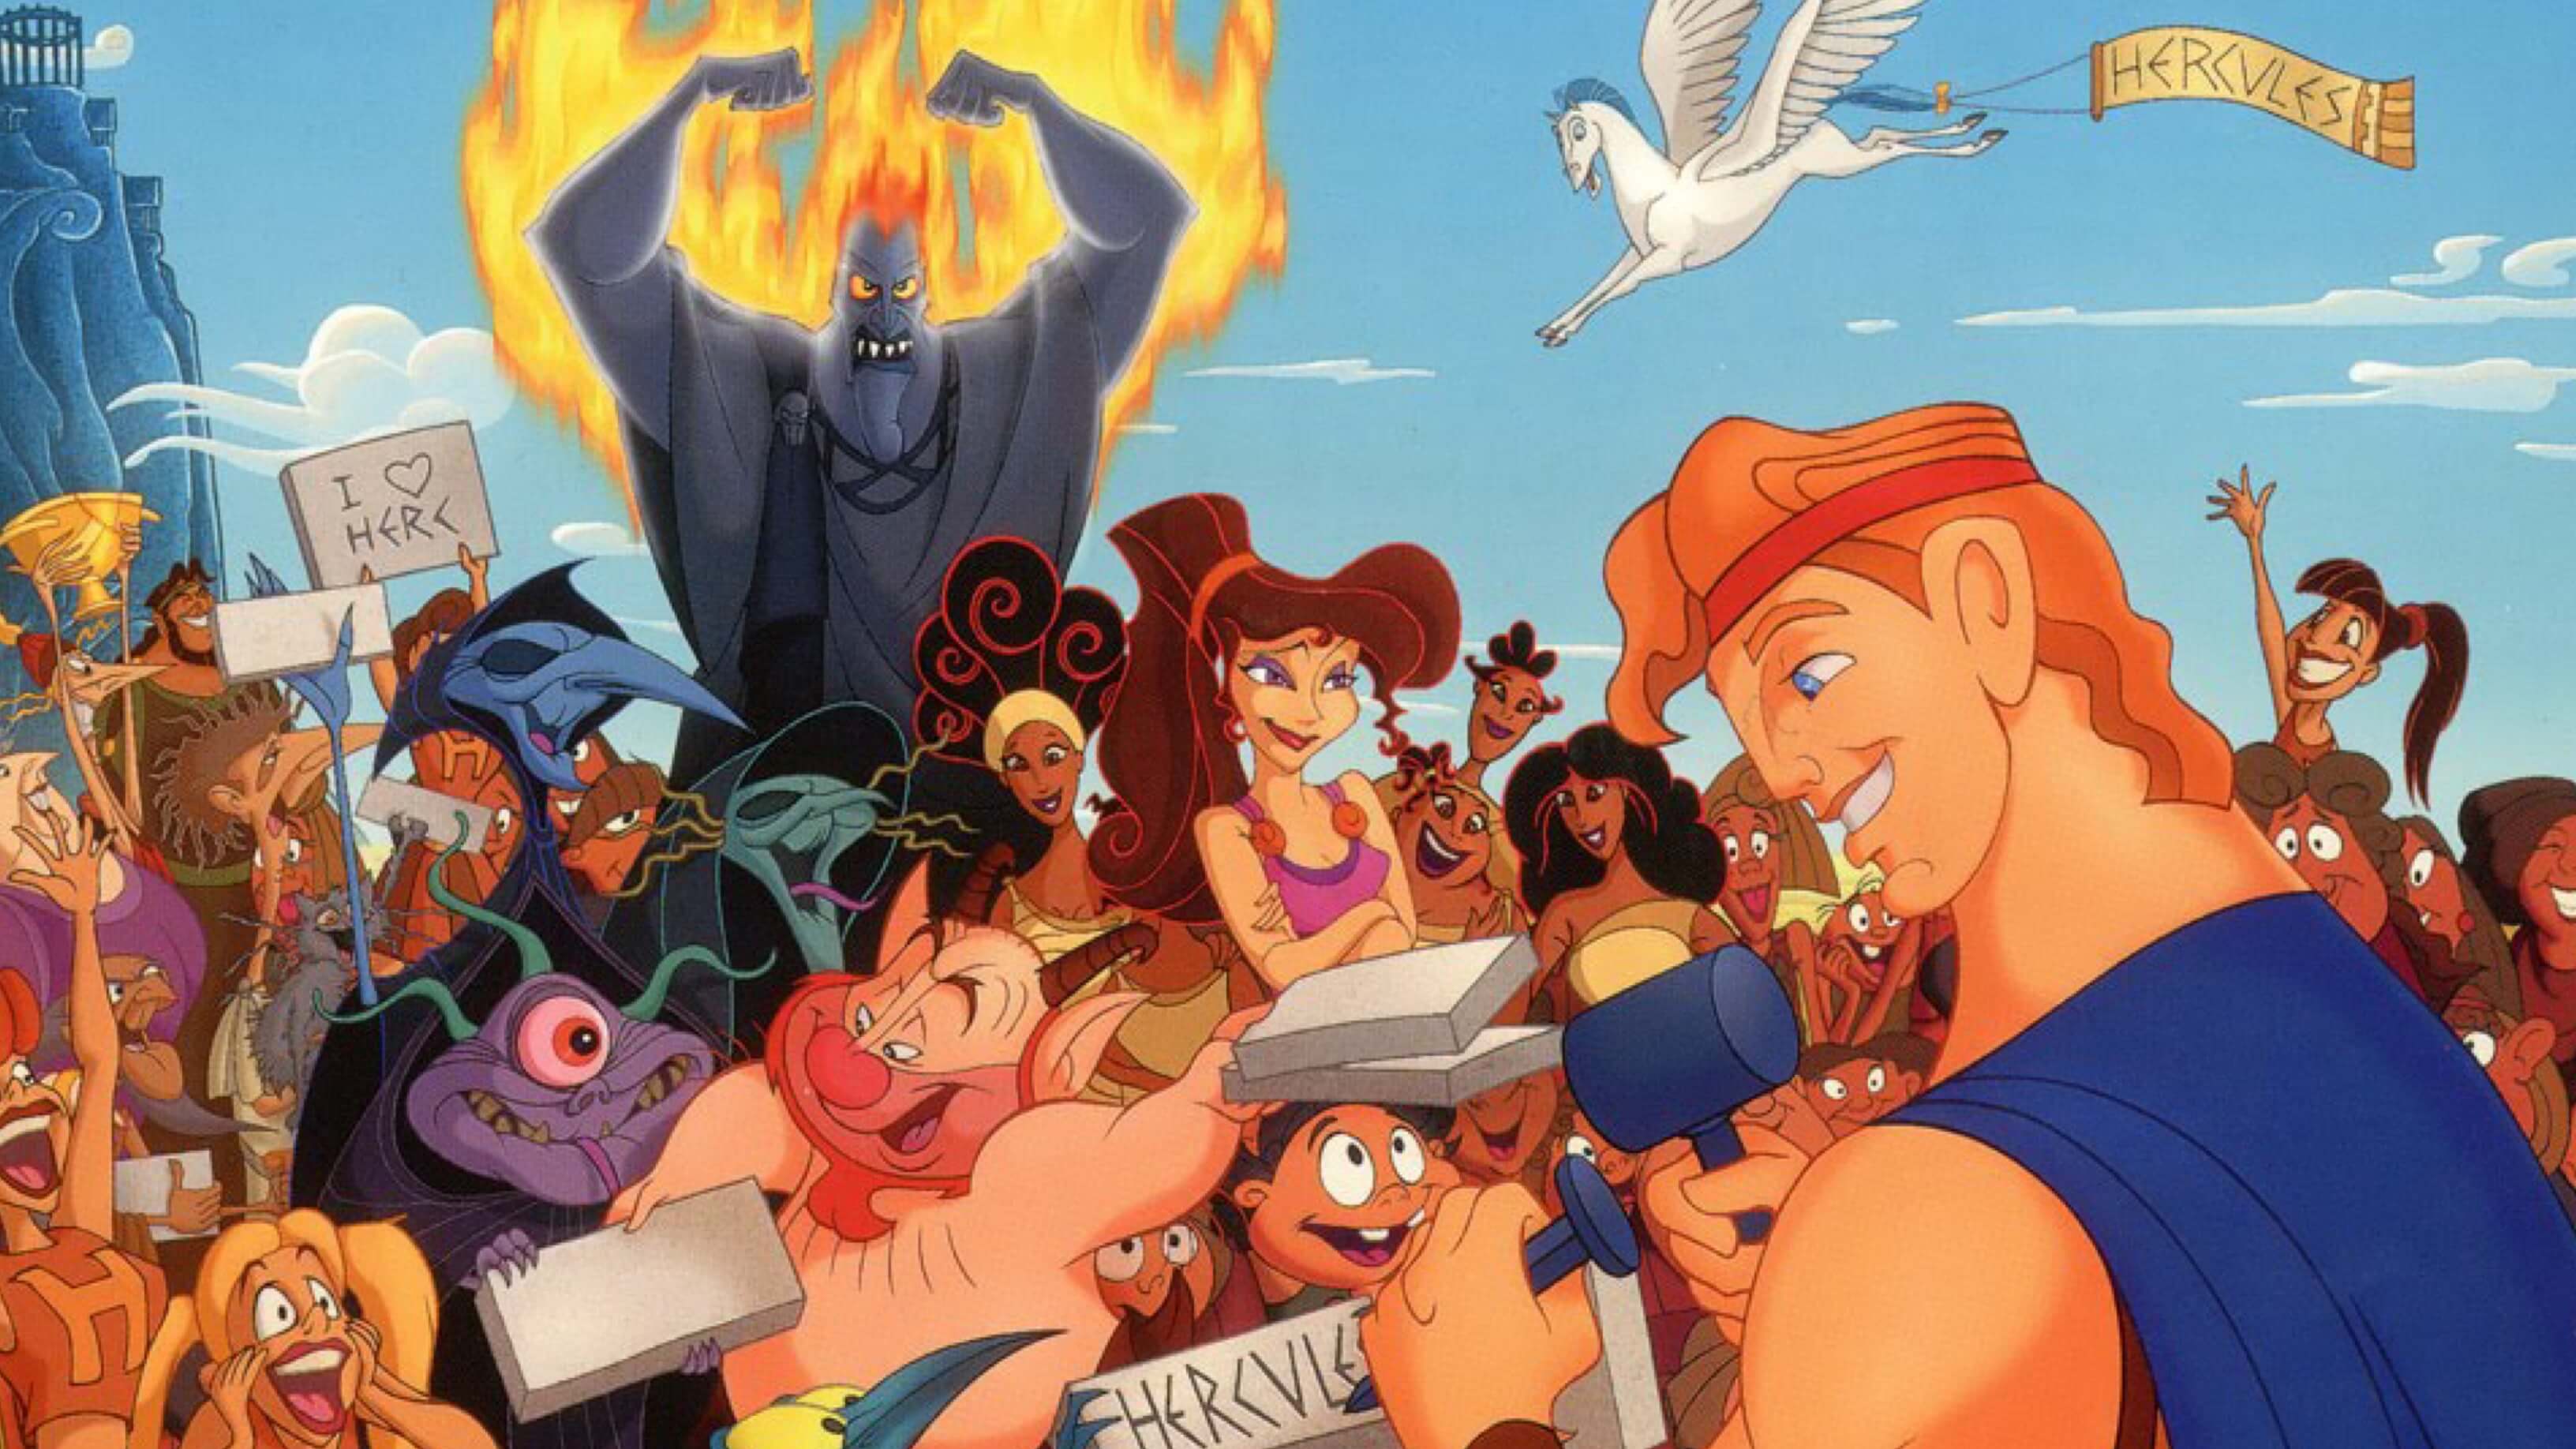 Russo Brothers Say The Live-Action ‘Hercules’ Remake Won’t be a “Literal Translation”